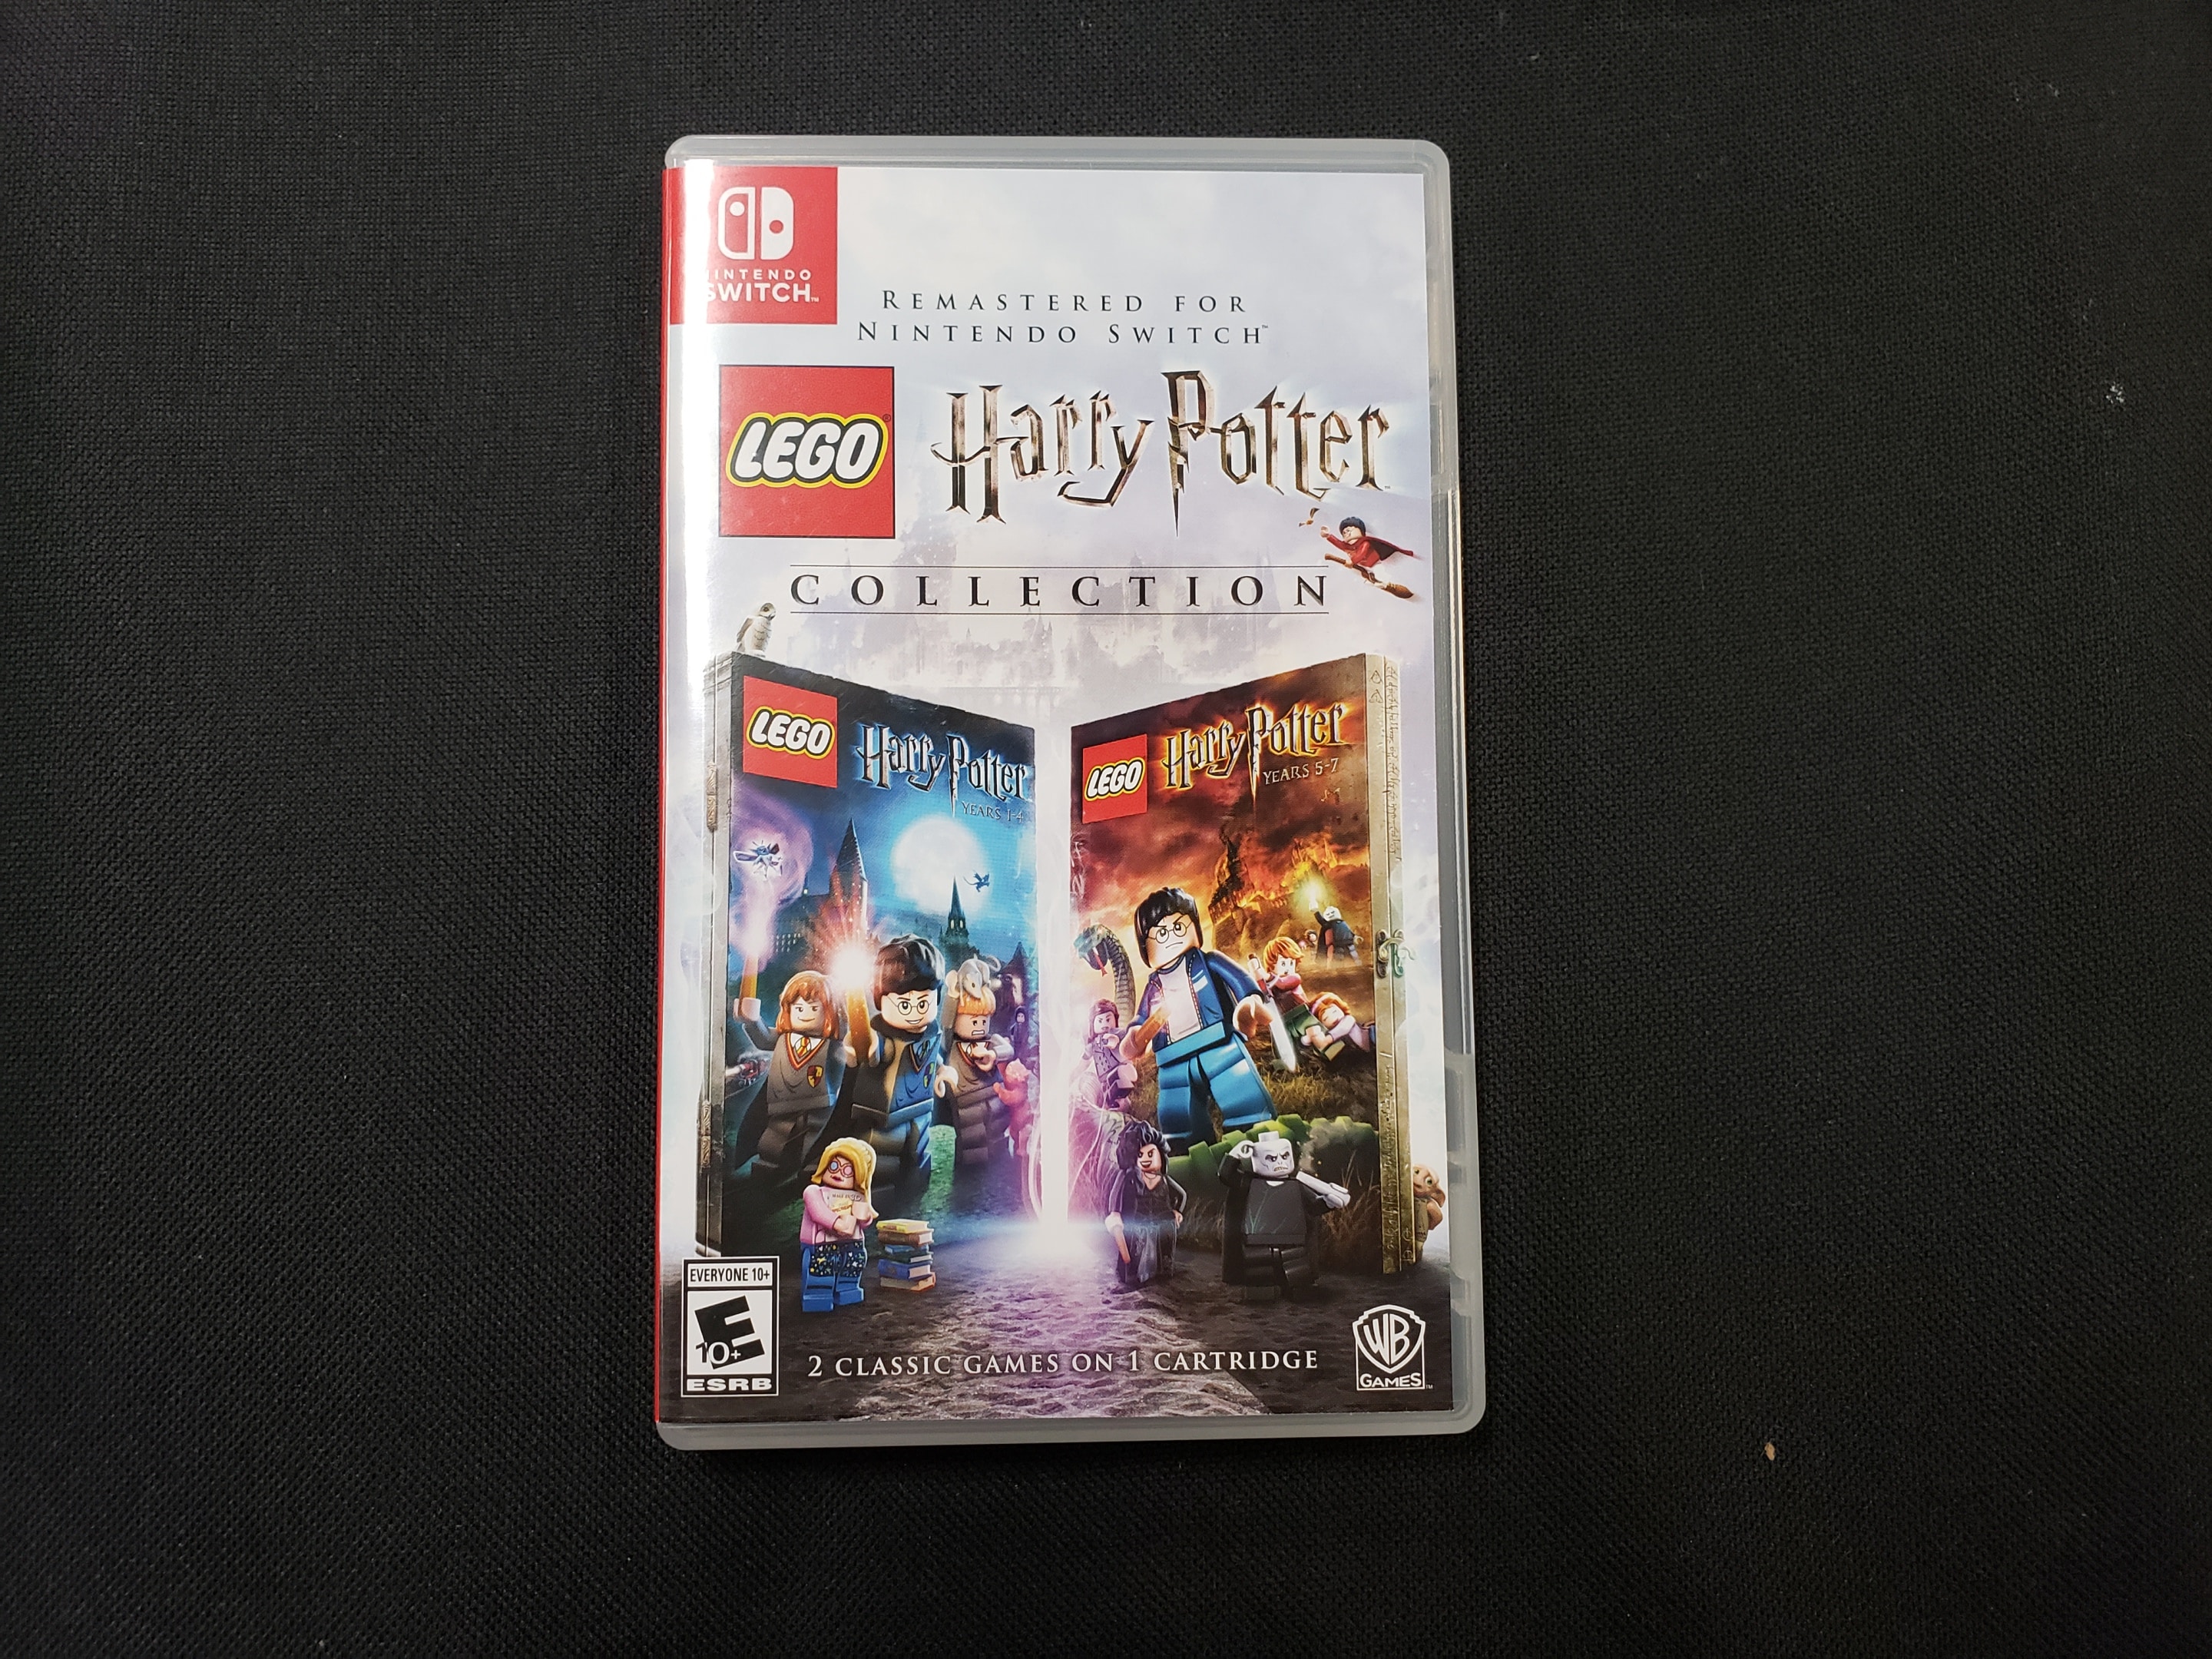 LEGO HARRY POTTER COLLECTION SWITCH # - LEGO HARRY POTTER COLLECTION SWITCH  # - WARNER BROS